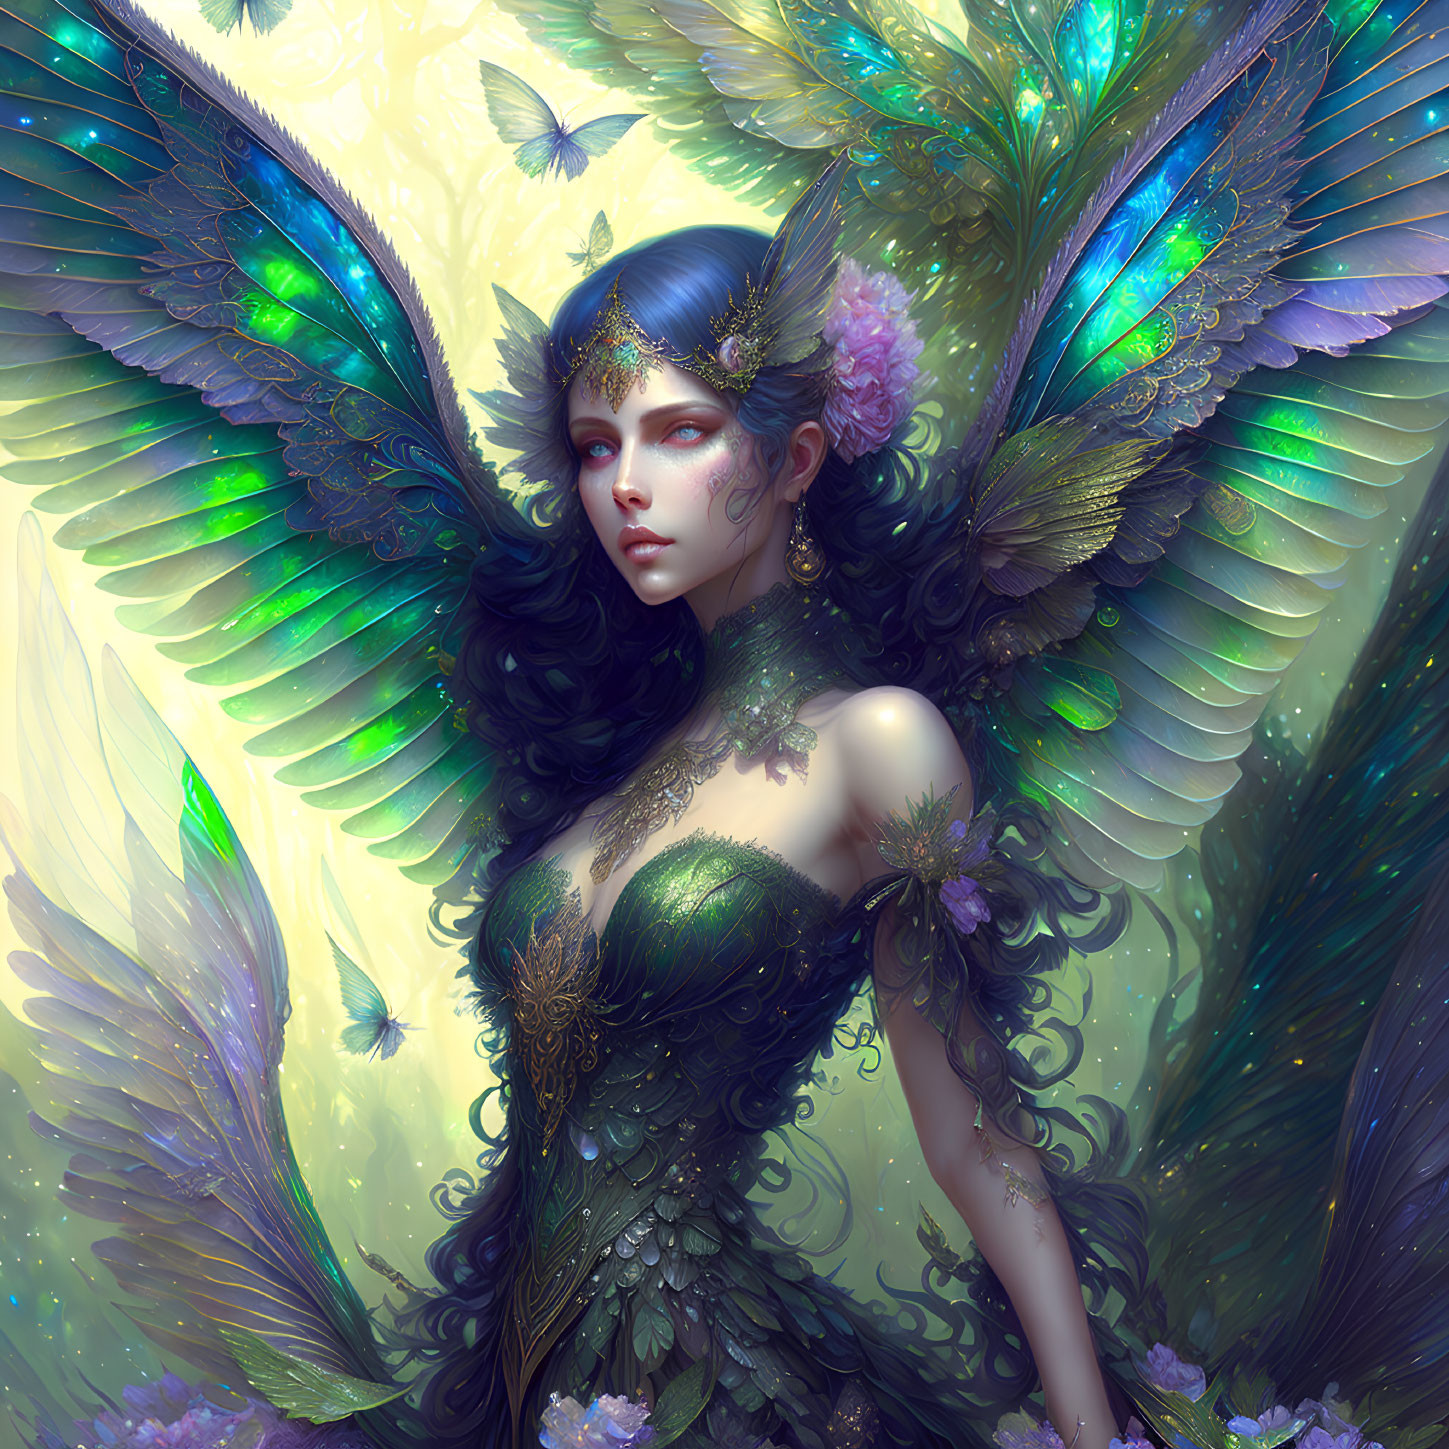 Ethereal woman with iridescent wings in mystical green attire